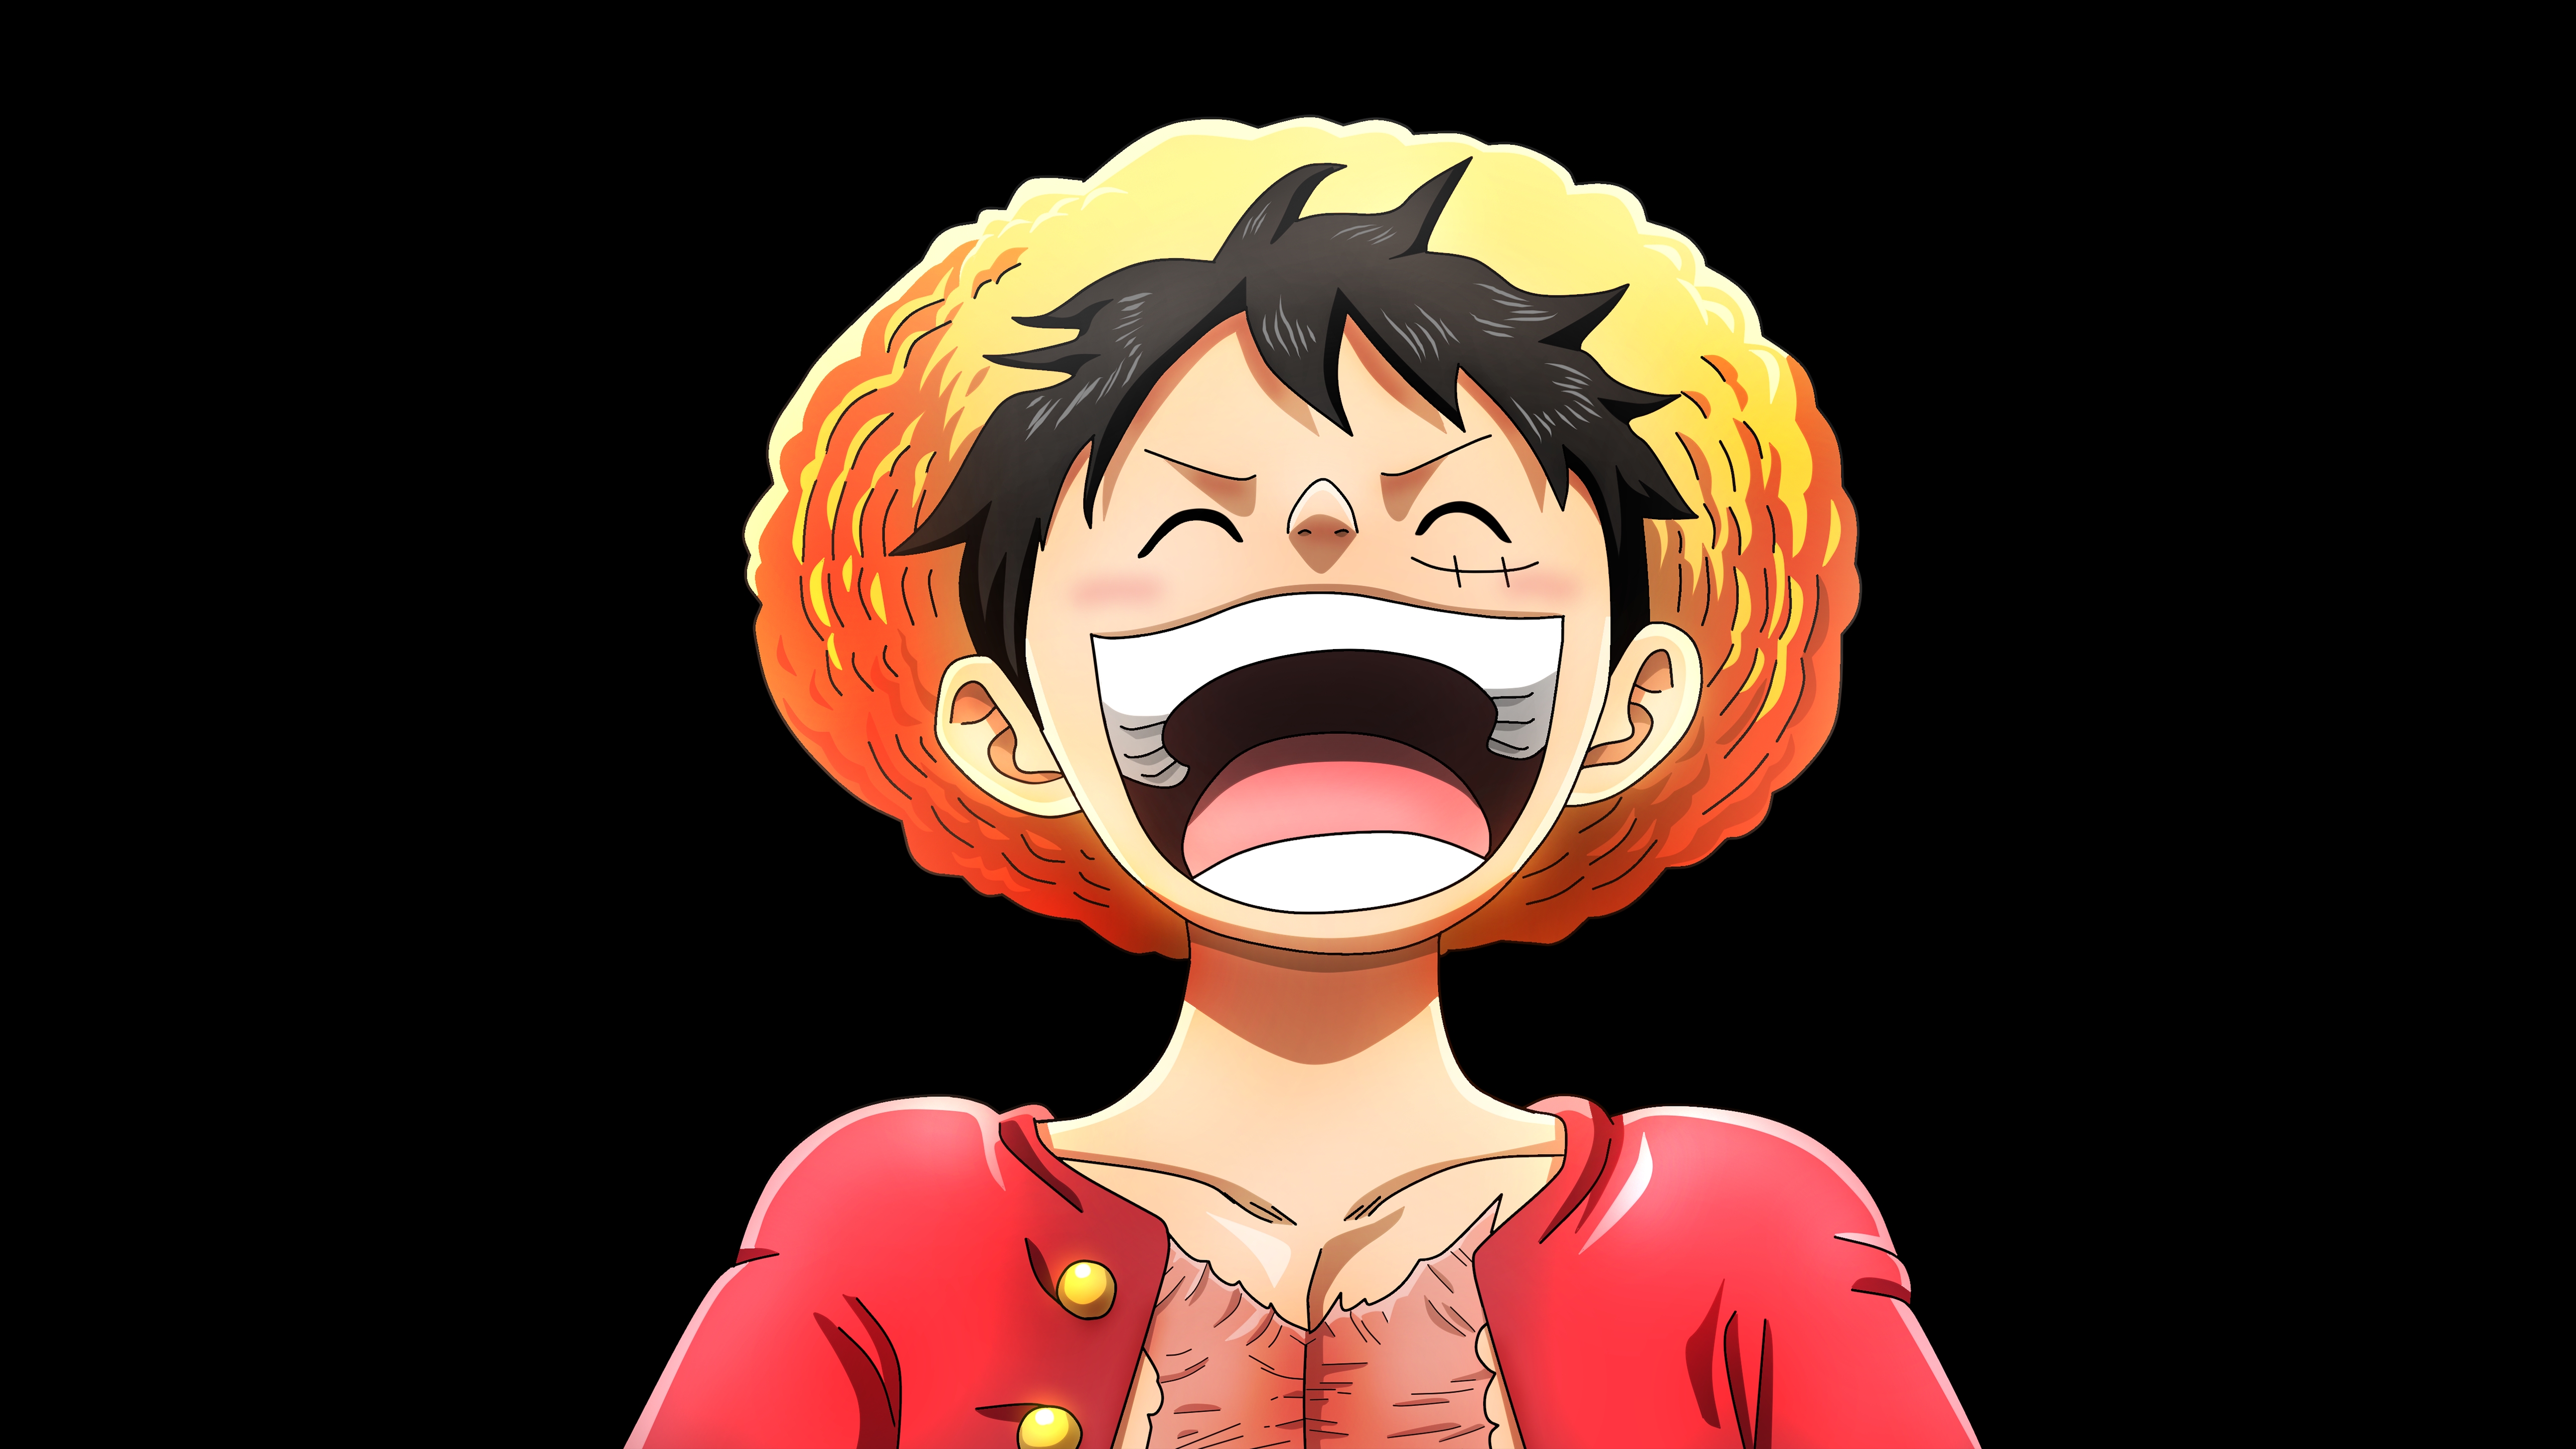 HD wallpaper, 5K, Laughing, One Piece, Black Background, Luffy